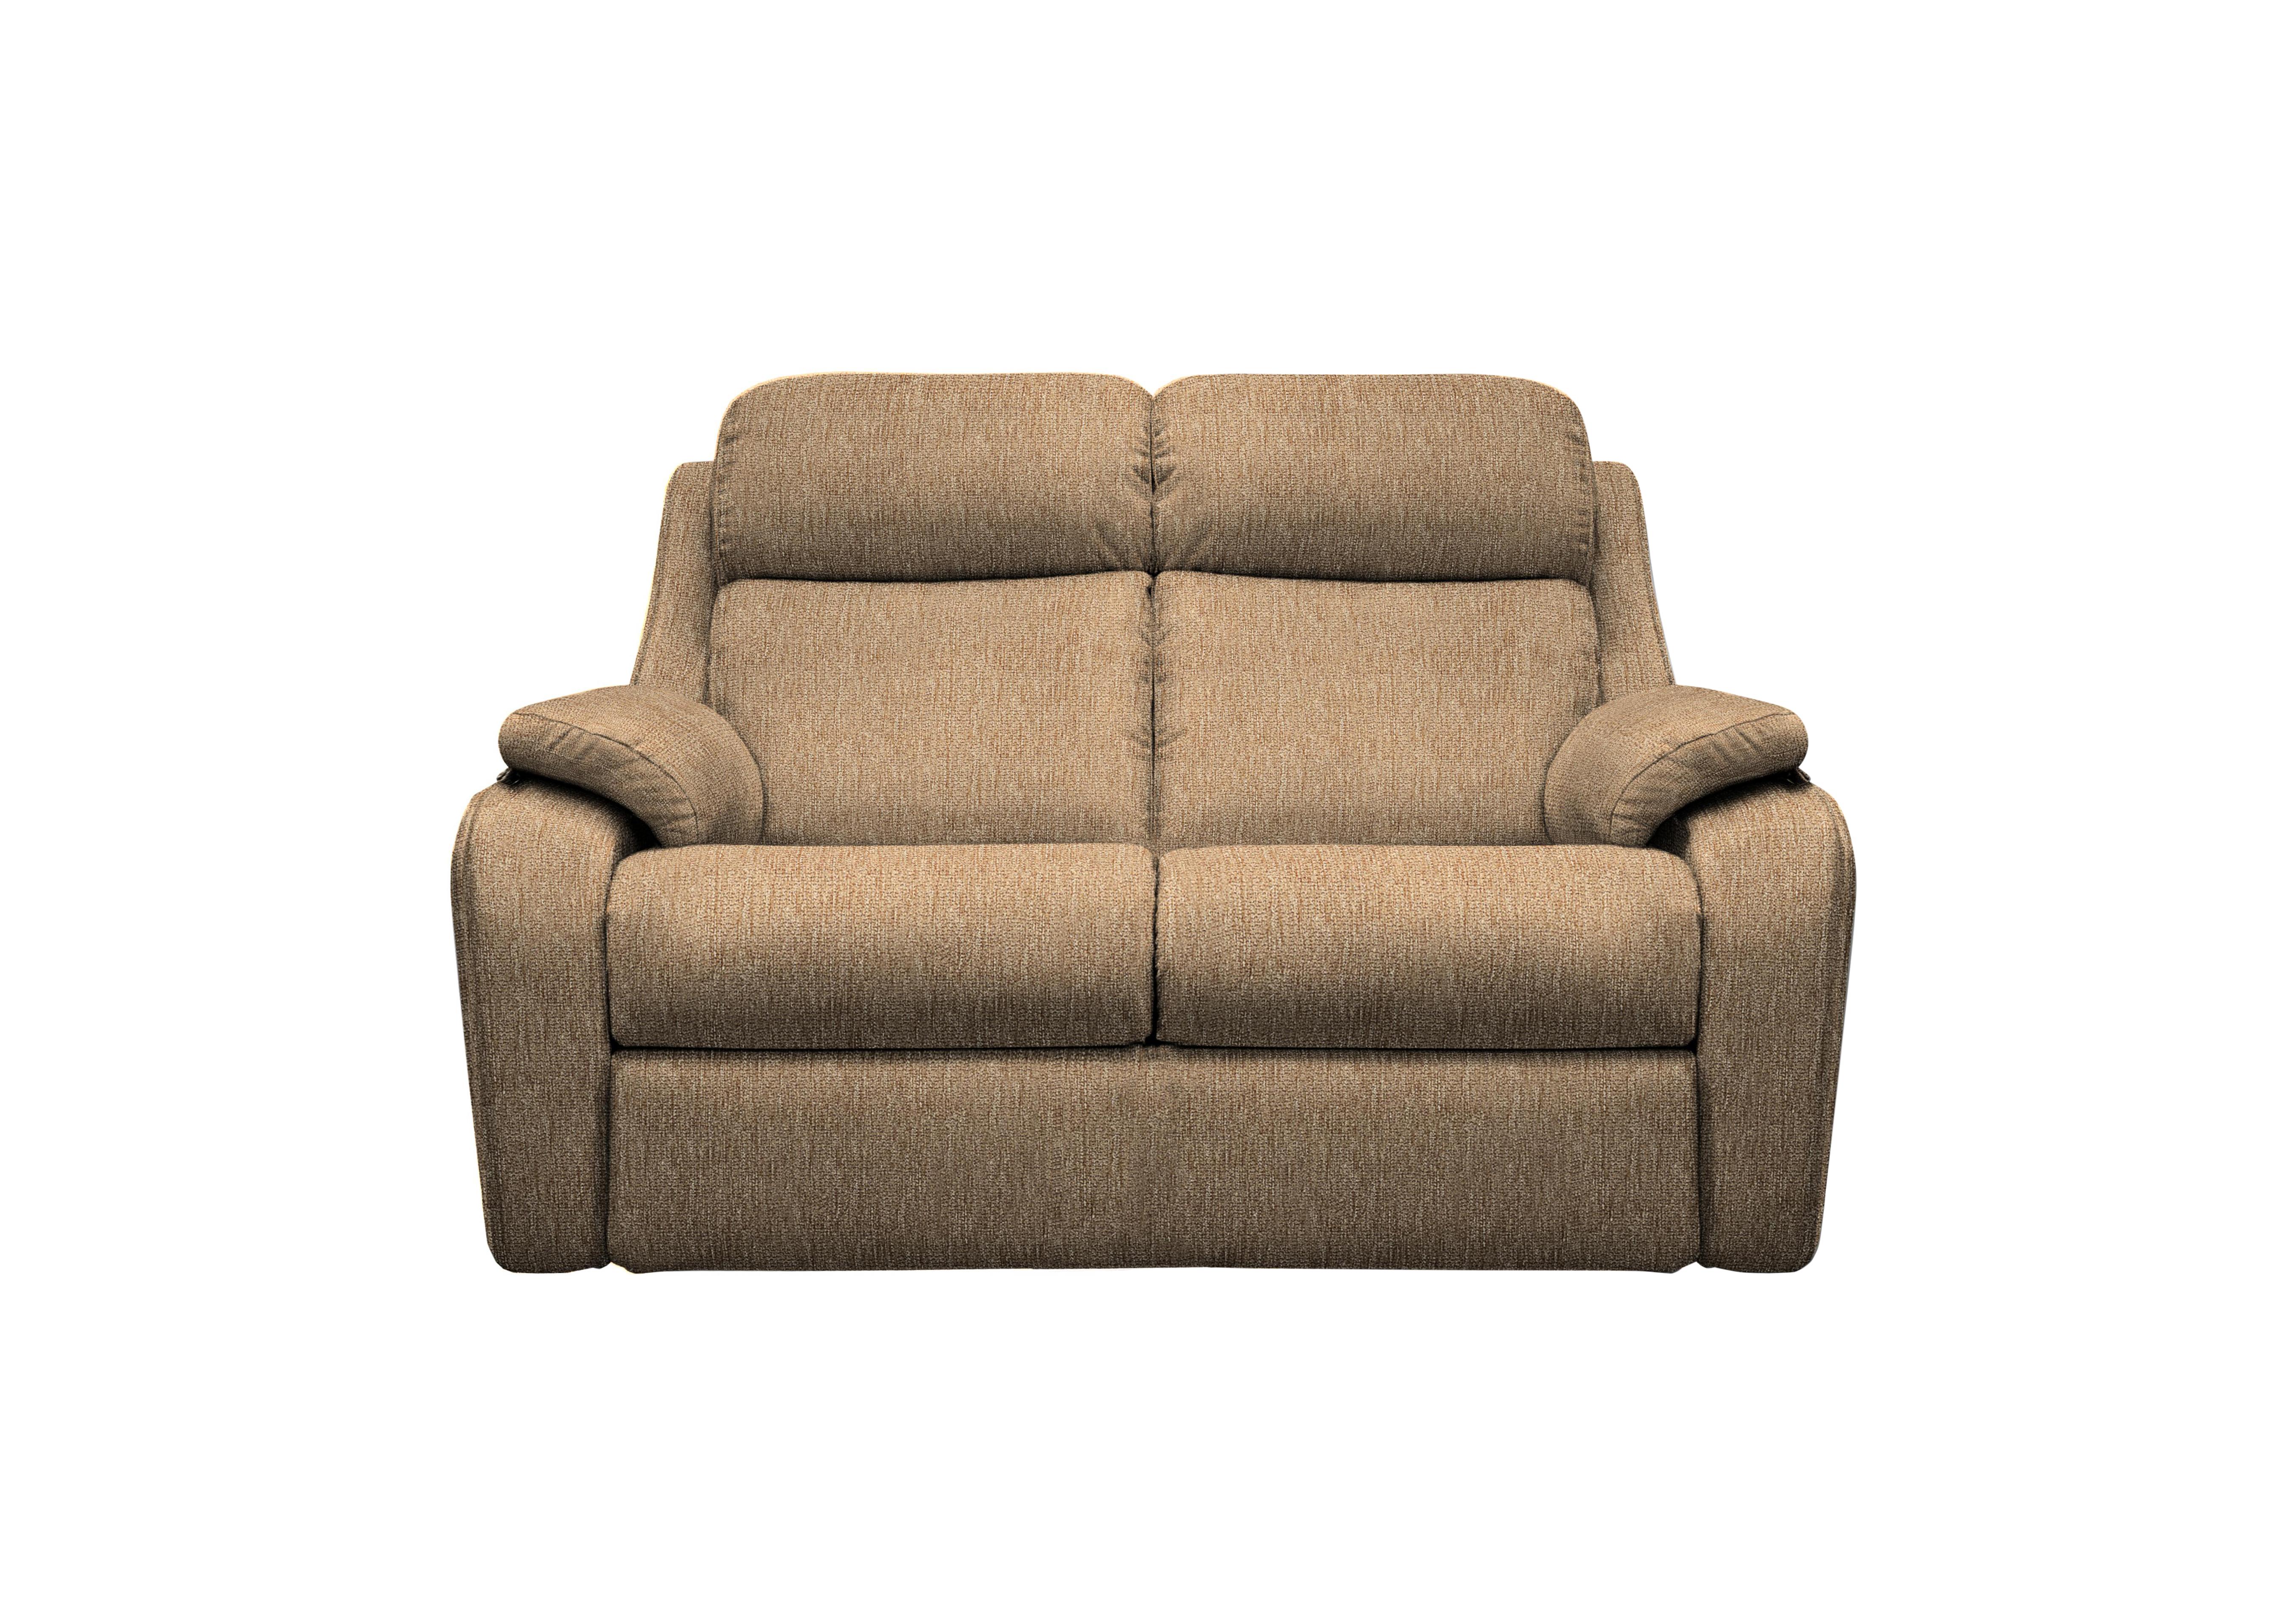 Kingsbury 2 Seater Fabric Power Recliner Sofa with Power Headrests in A070 Boucle Cocoa on Furniture Village